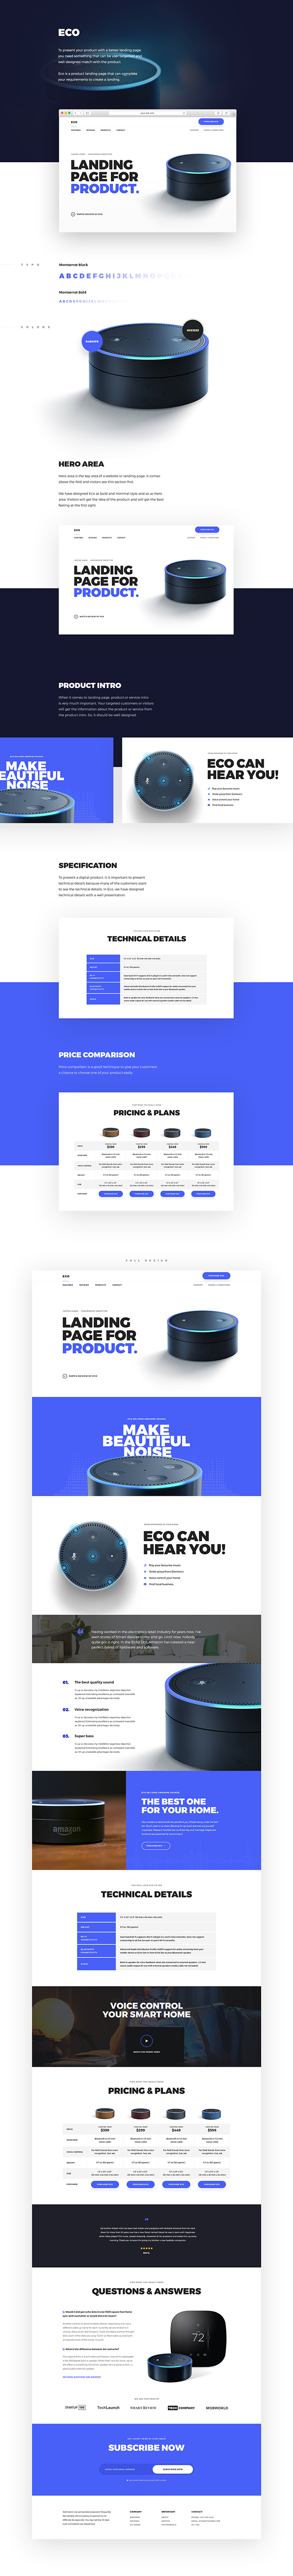 Eco - Product Landing Page